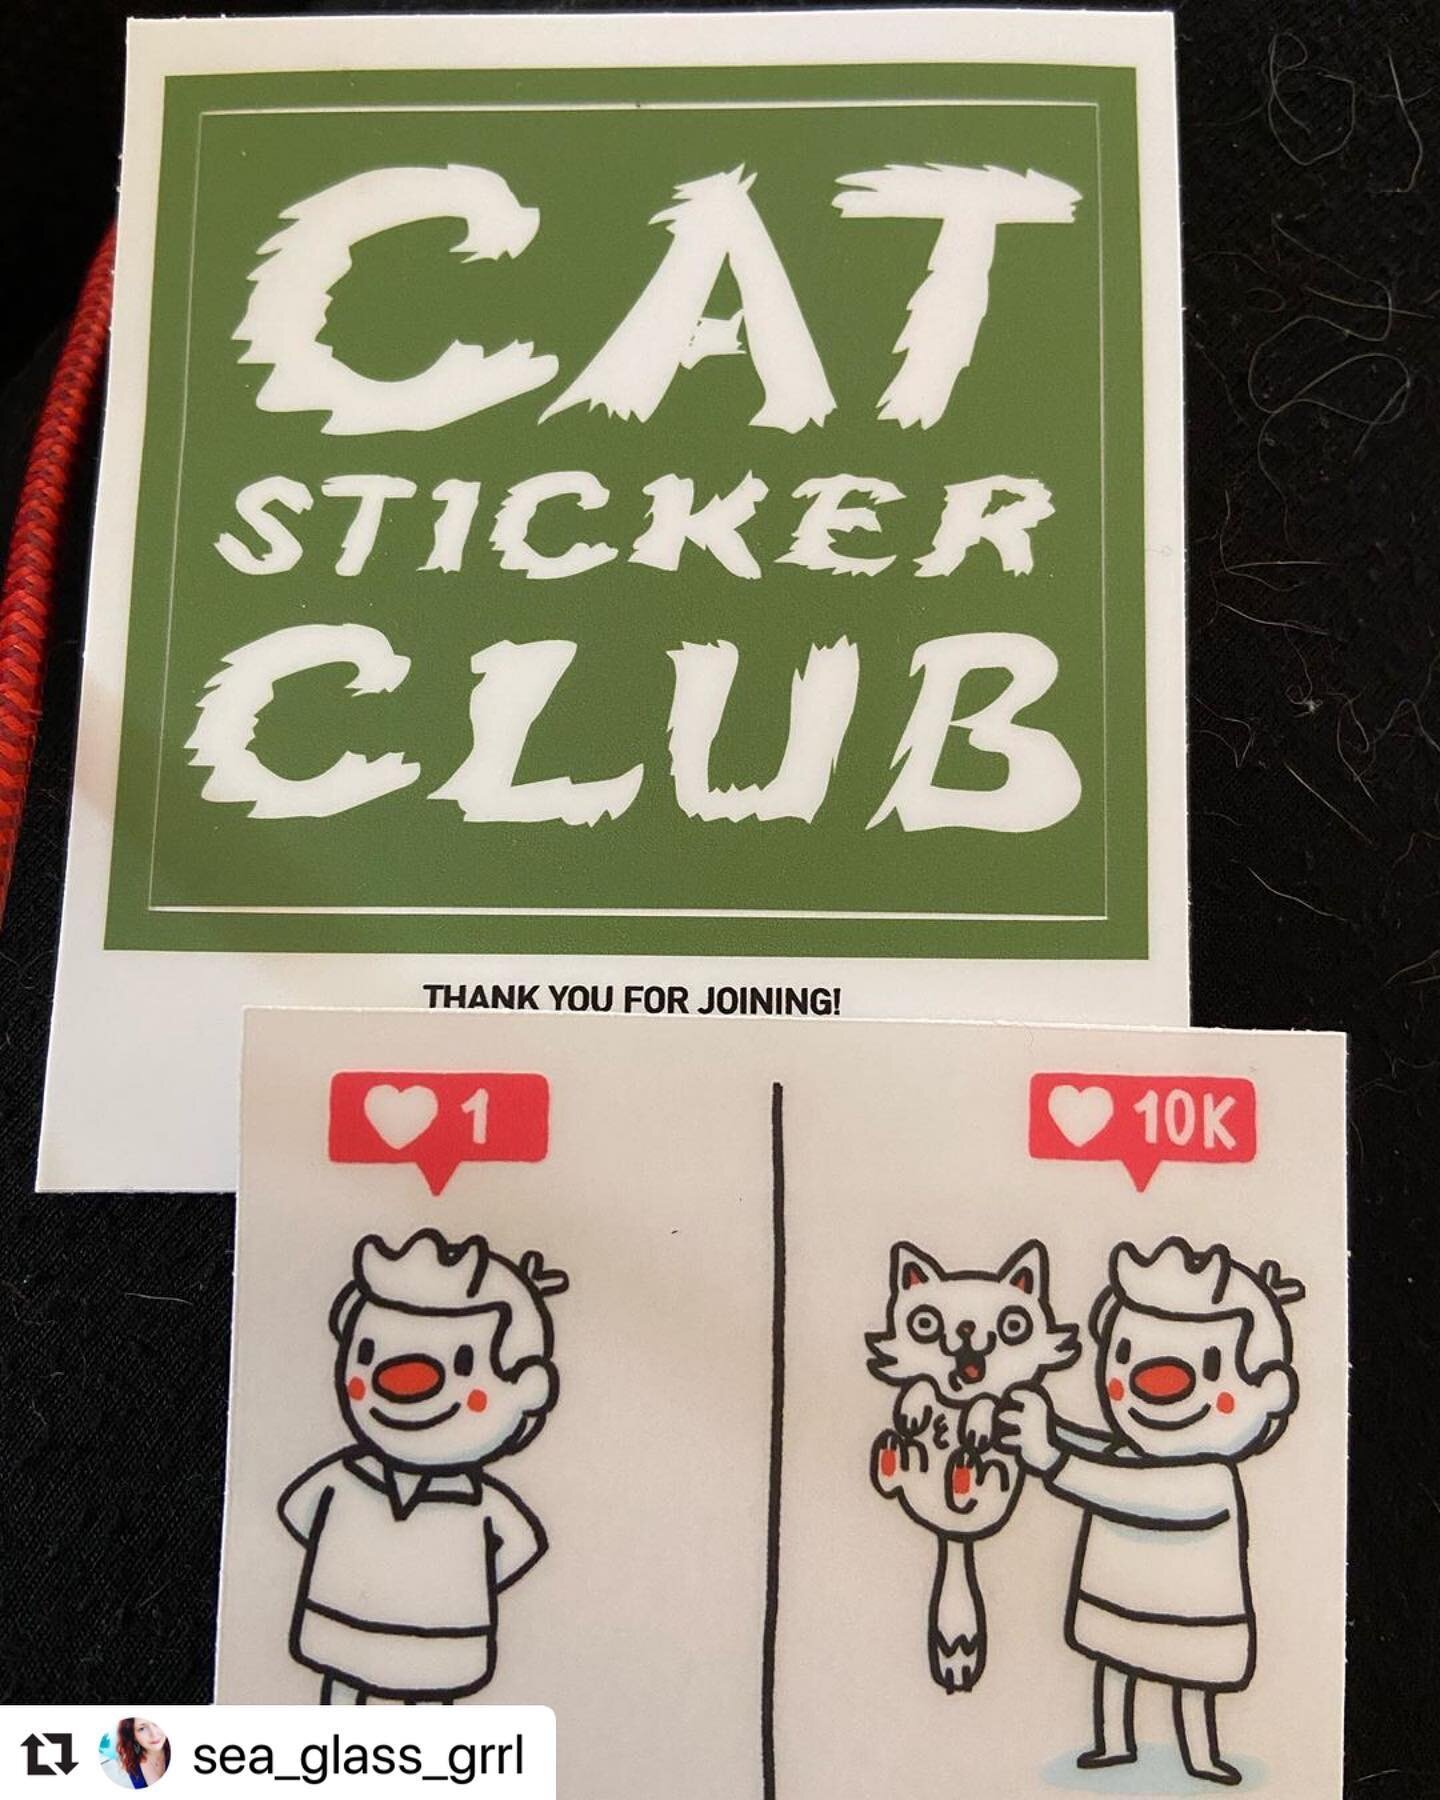 Love this design by @rodrigobhzz because adding a cat to a picture will always get you more likes ❤️ #Repost @sea_glass_grrl with @make_repost
・・・
*notice the cat hair in the background for added flair* #catstickerclub #ilovemycat #catsofinstagram #c